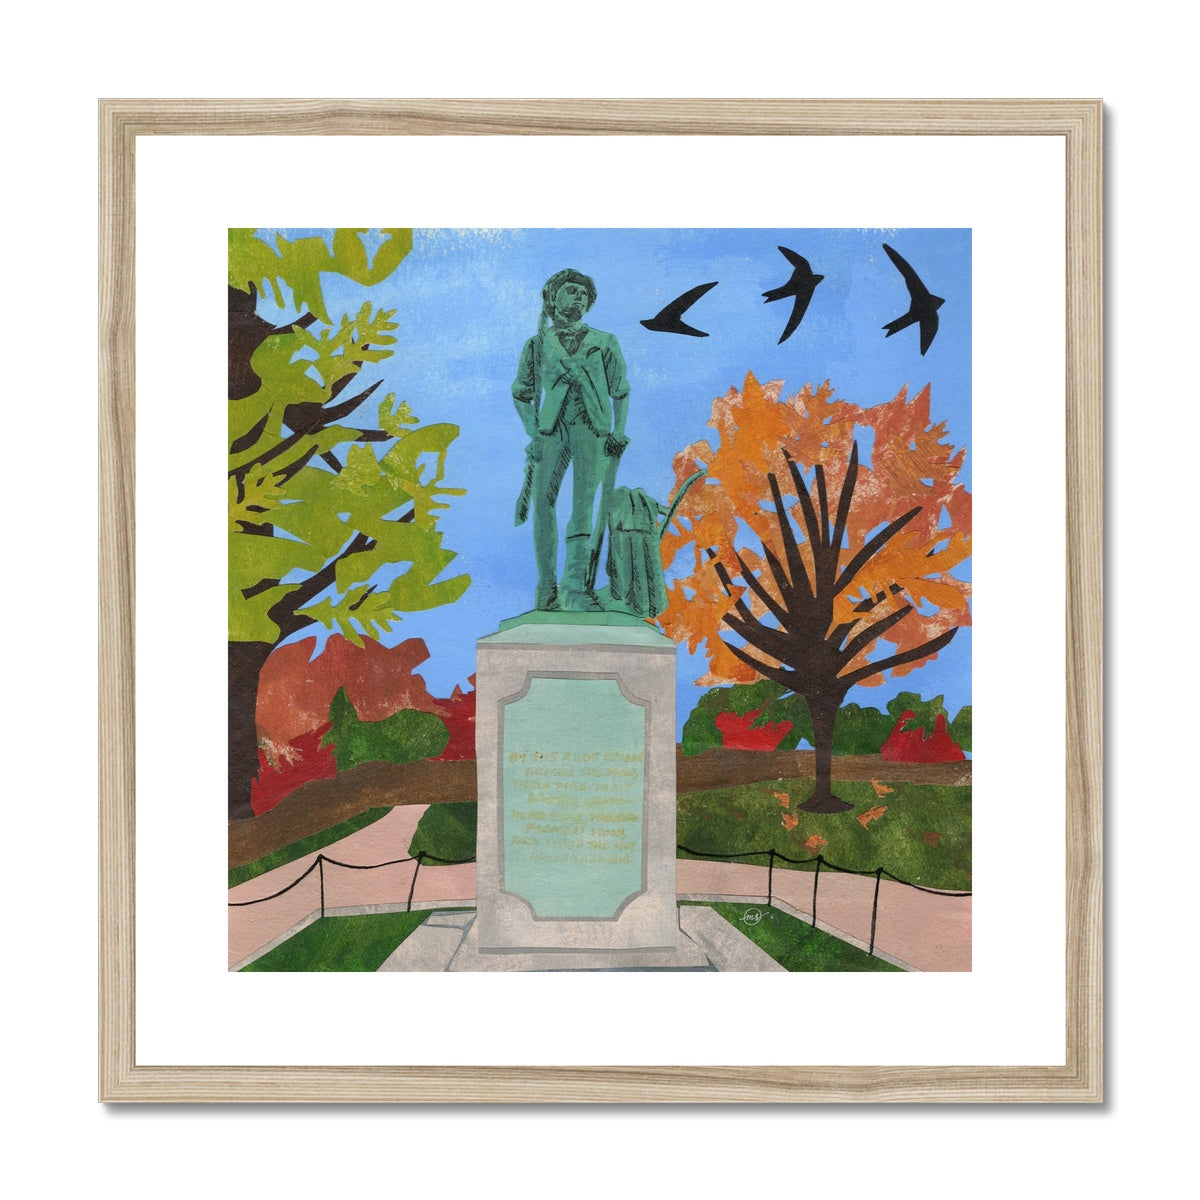 Concord Minuteman Framed & Matted Print